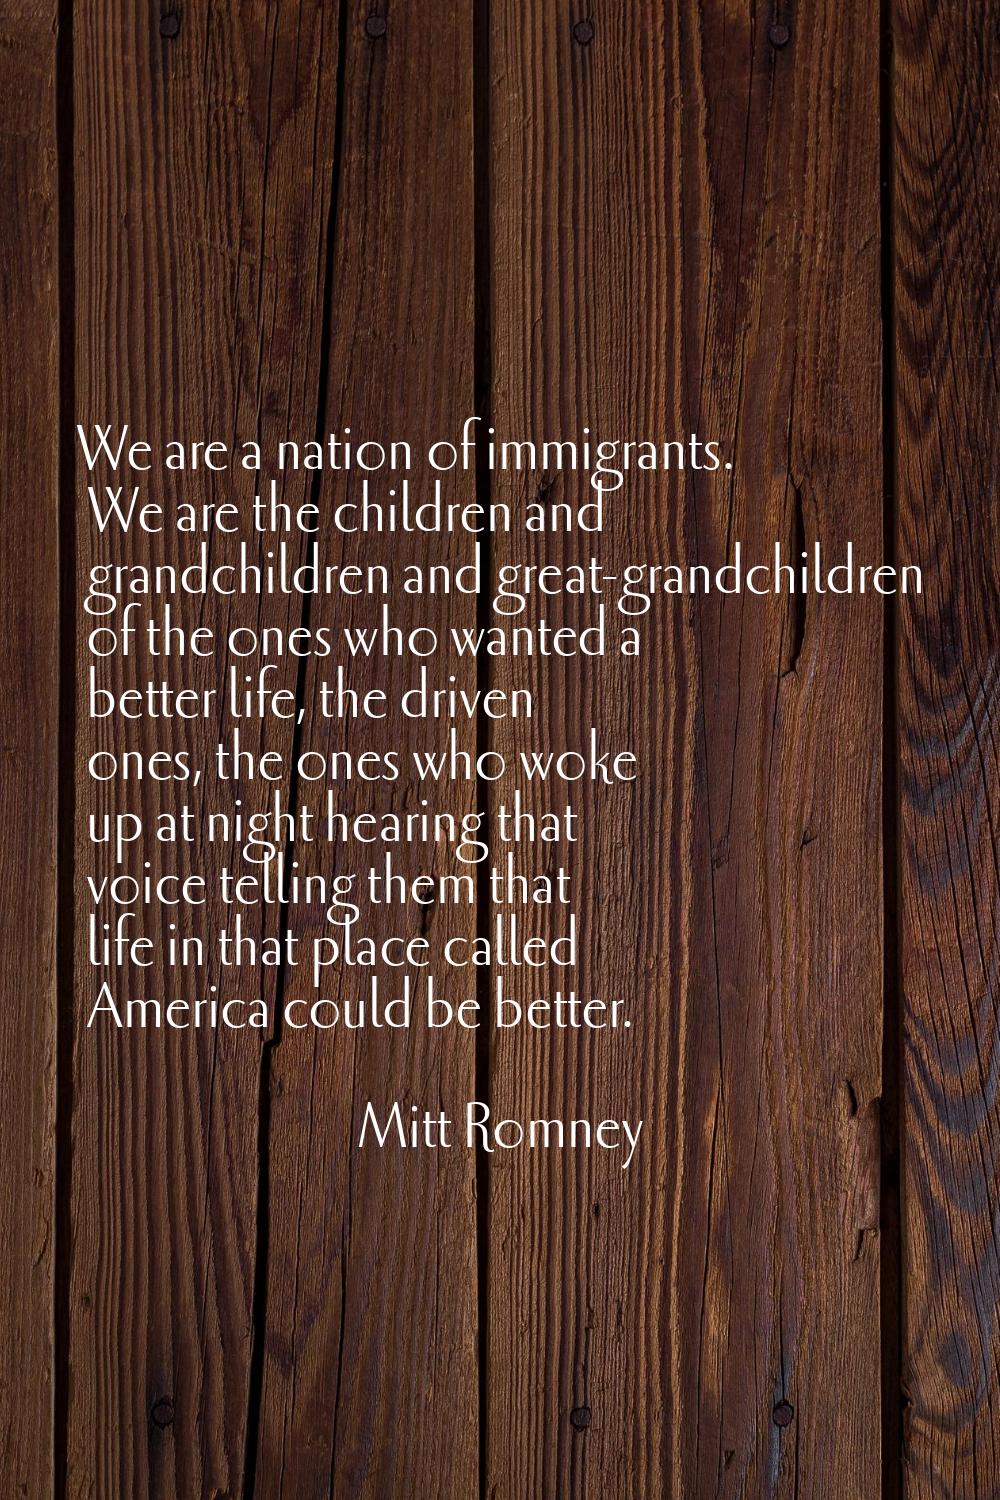 We are a nation of immigrants. We are the children and grandchildren and great-grandchildren of the